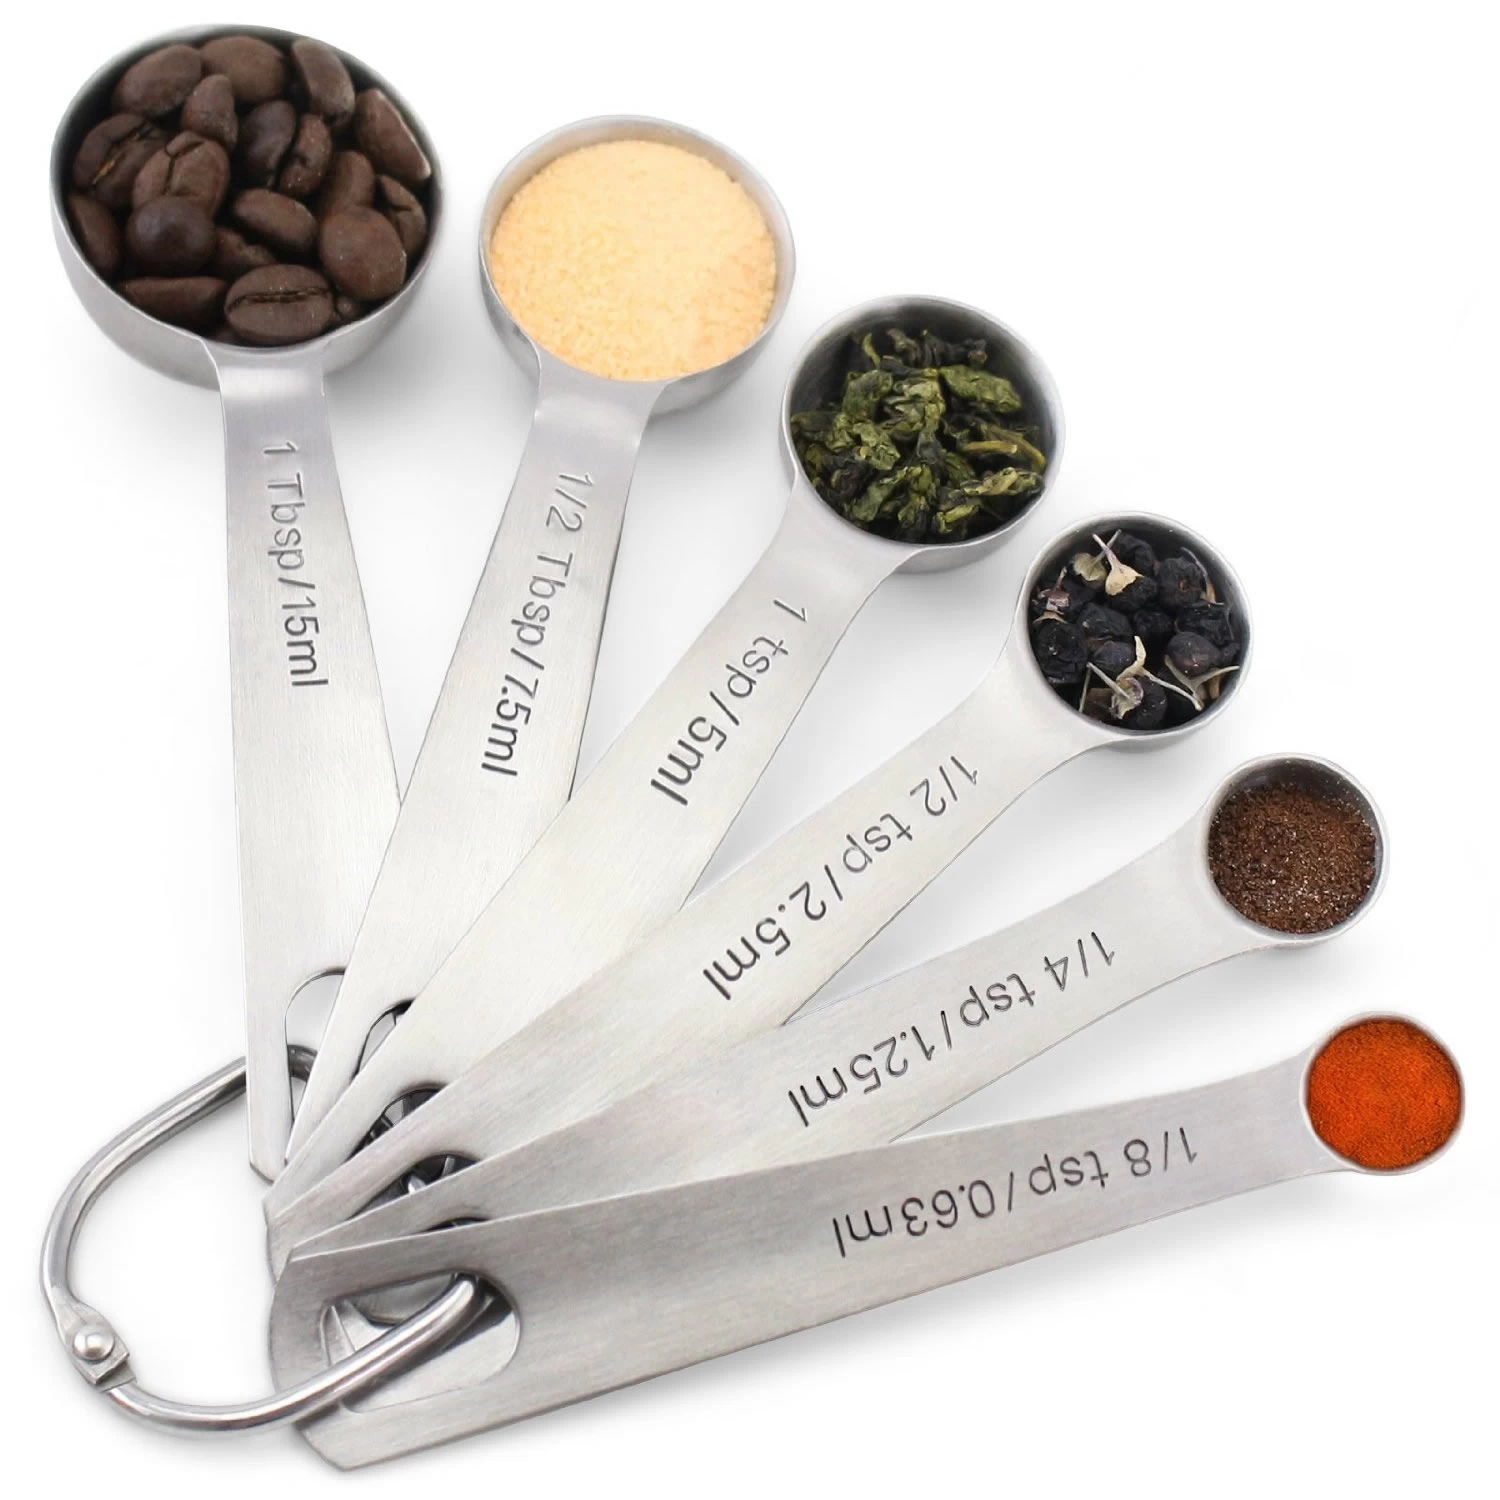 oem Stainless Steel Mearsuring Spoon, Stainless Steel Mearsuring Spoon supplier